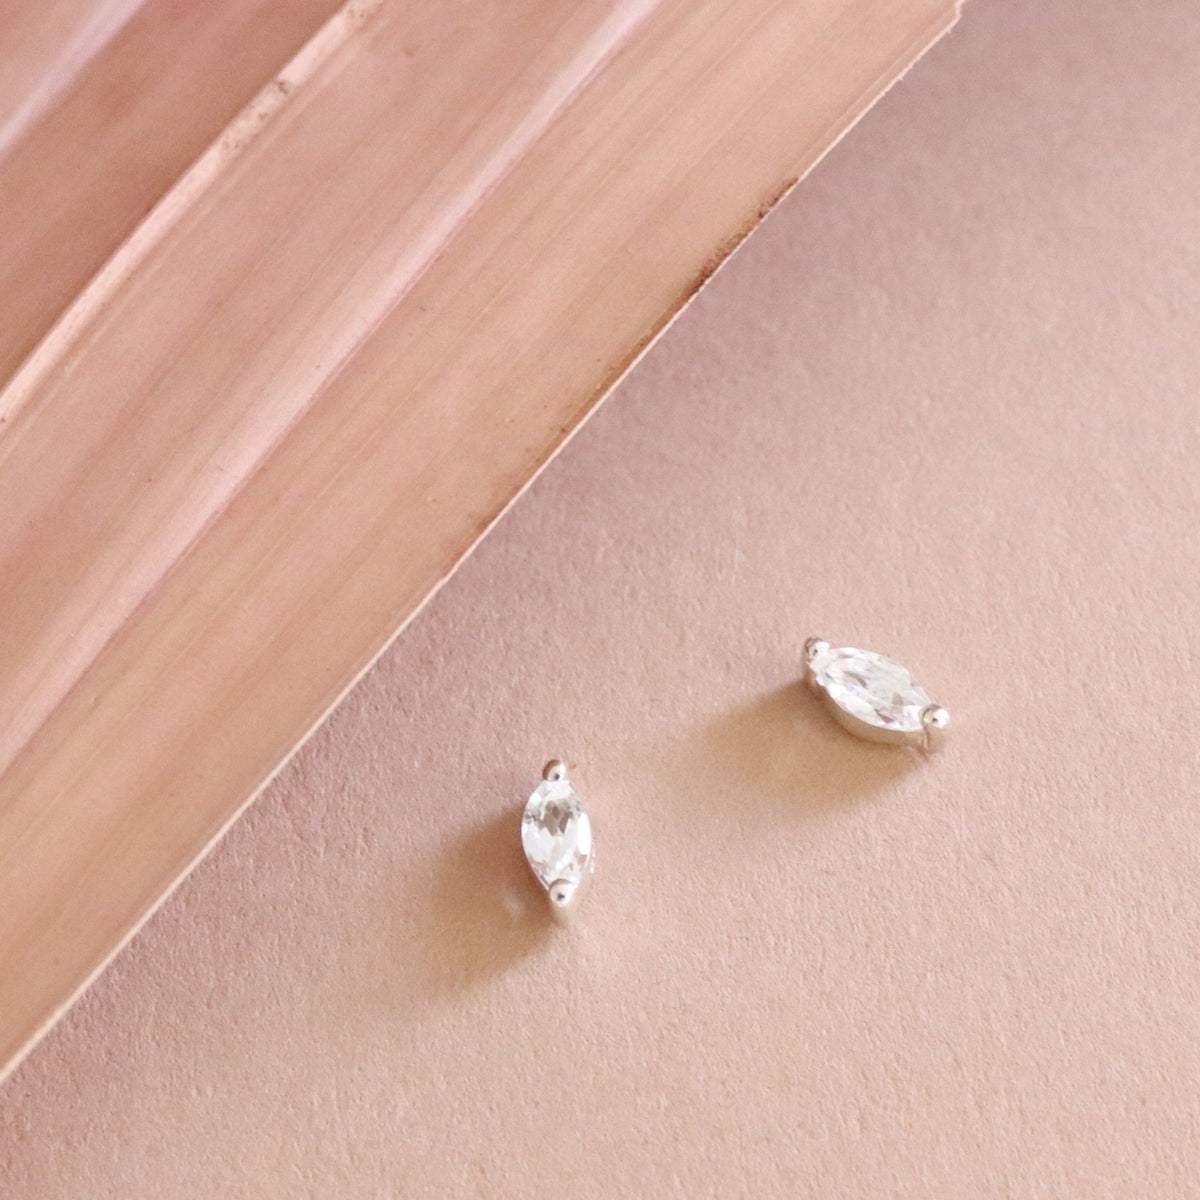 TINY LOVE MARQUIESE STUDS - WHITE TOPAZ &amp; SILVER - SO PRETTY CARA COTTER